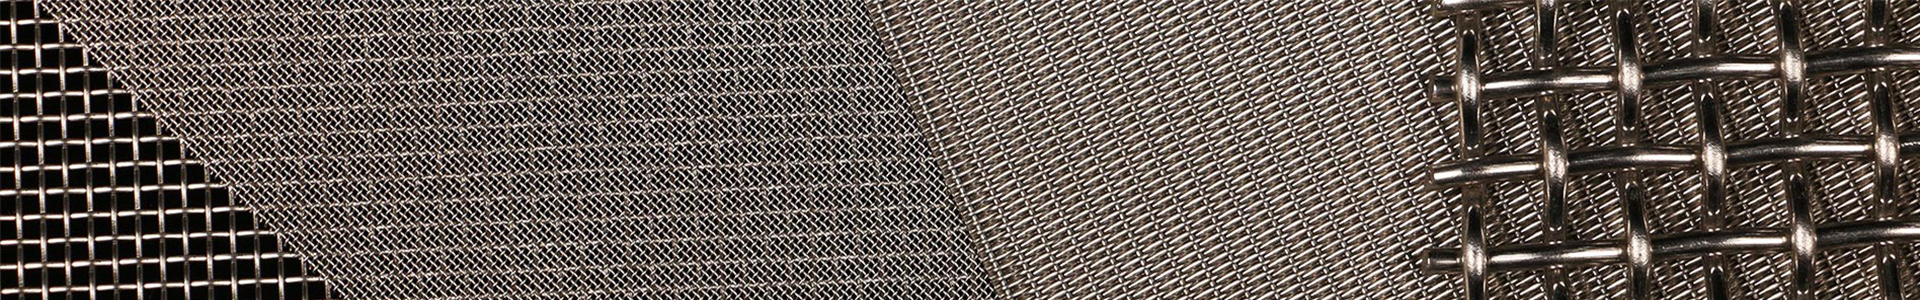 STAINLESS STEEL WIRE MESH CLOTH 